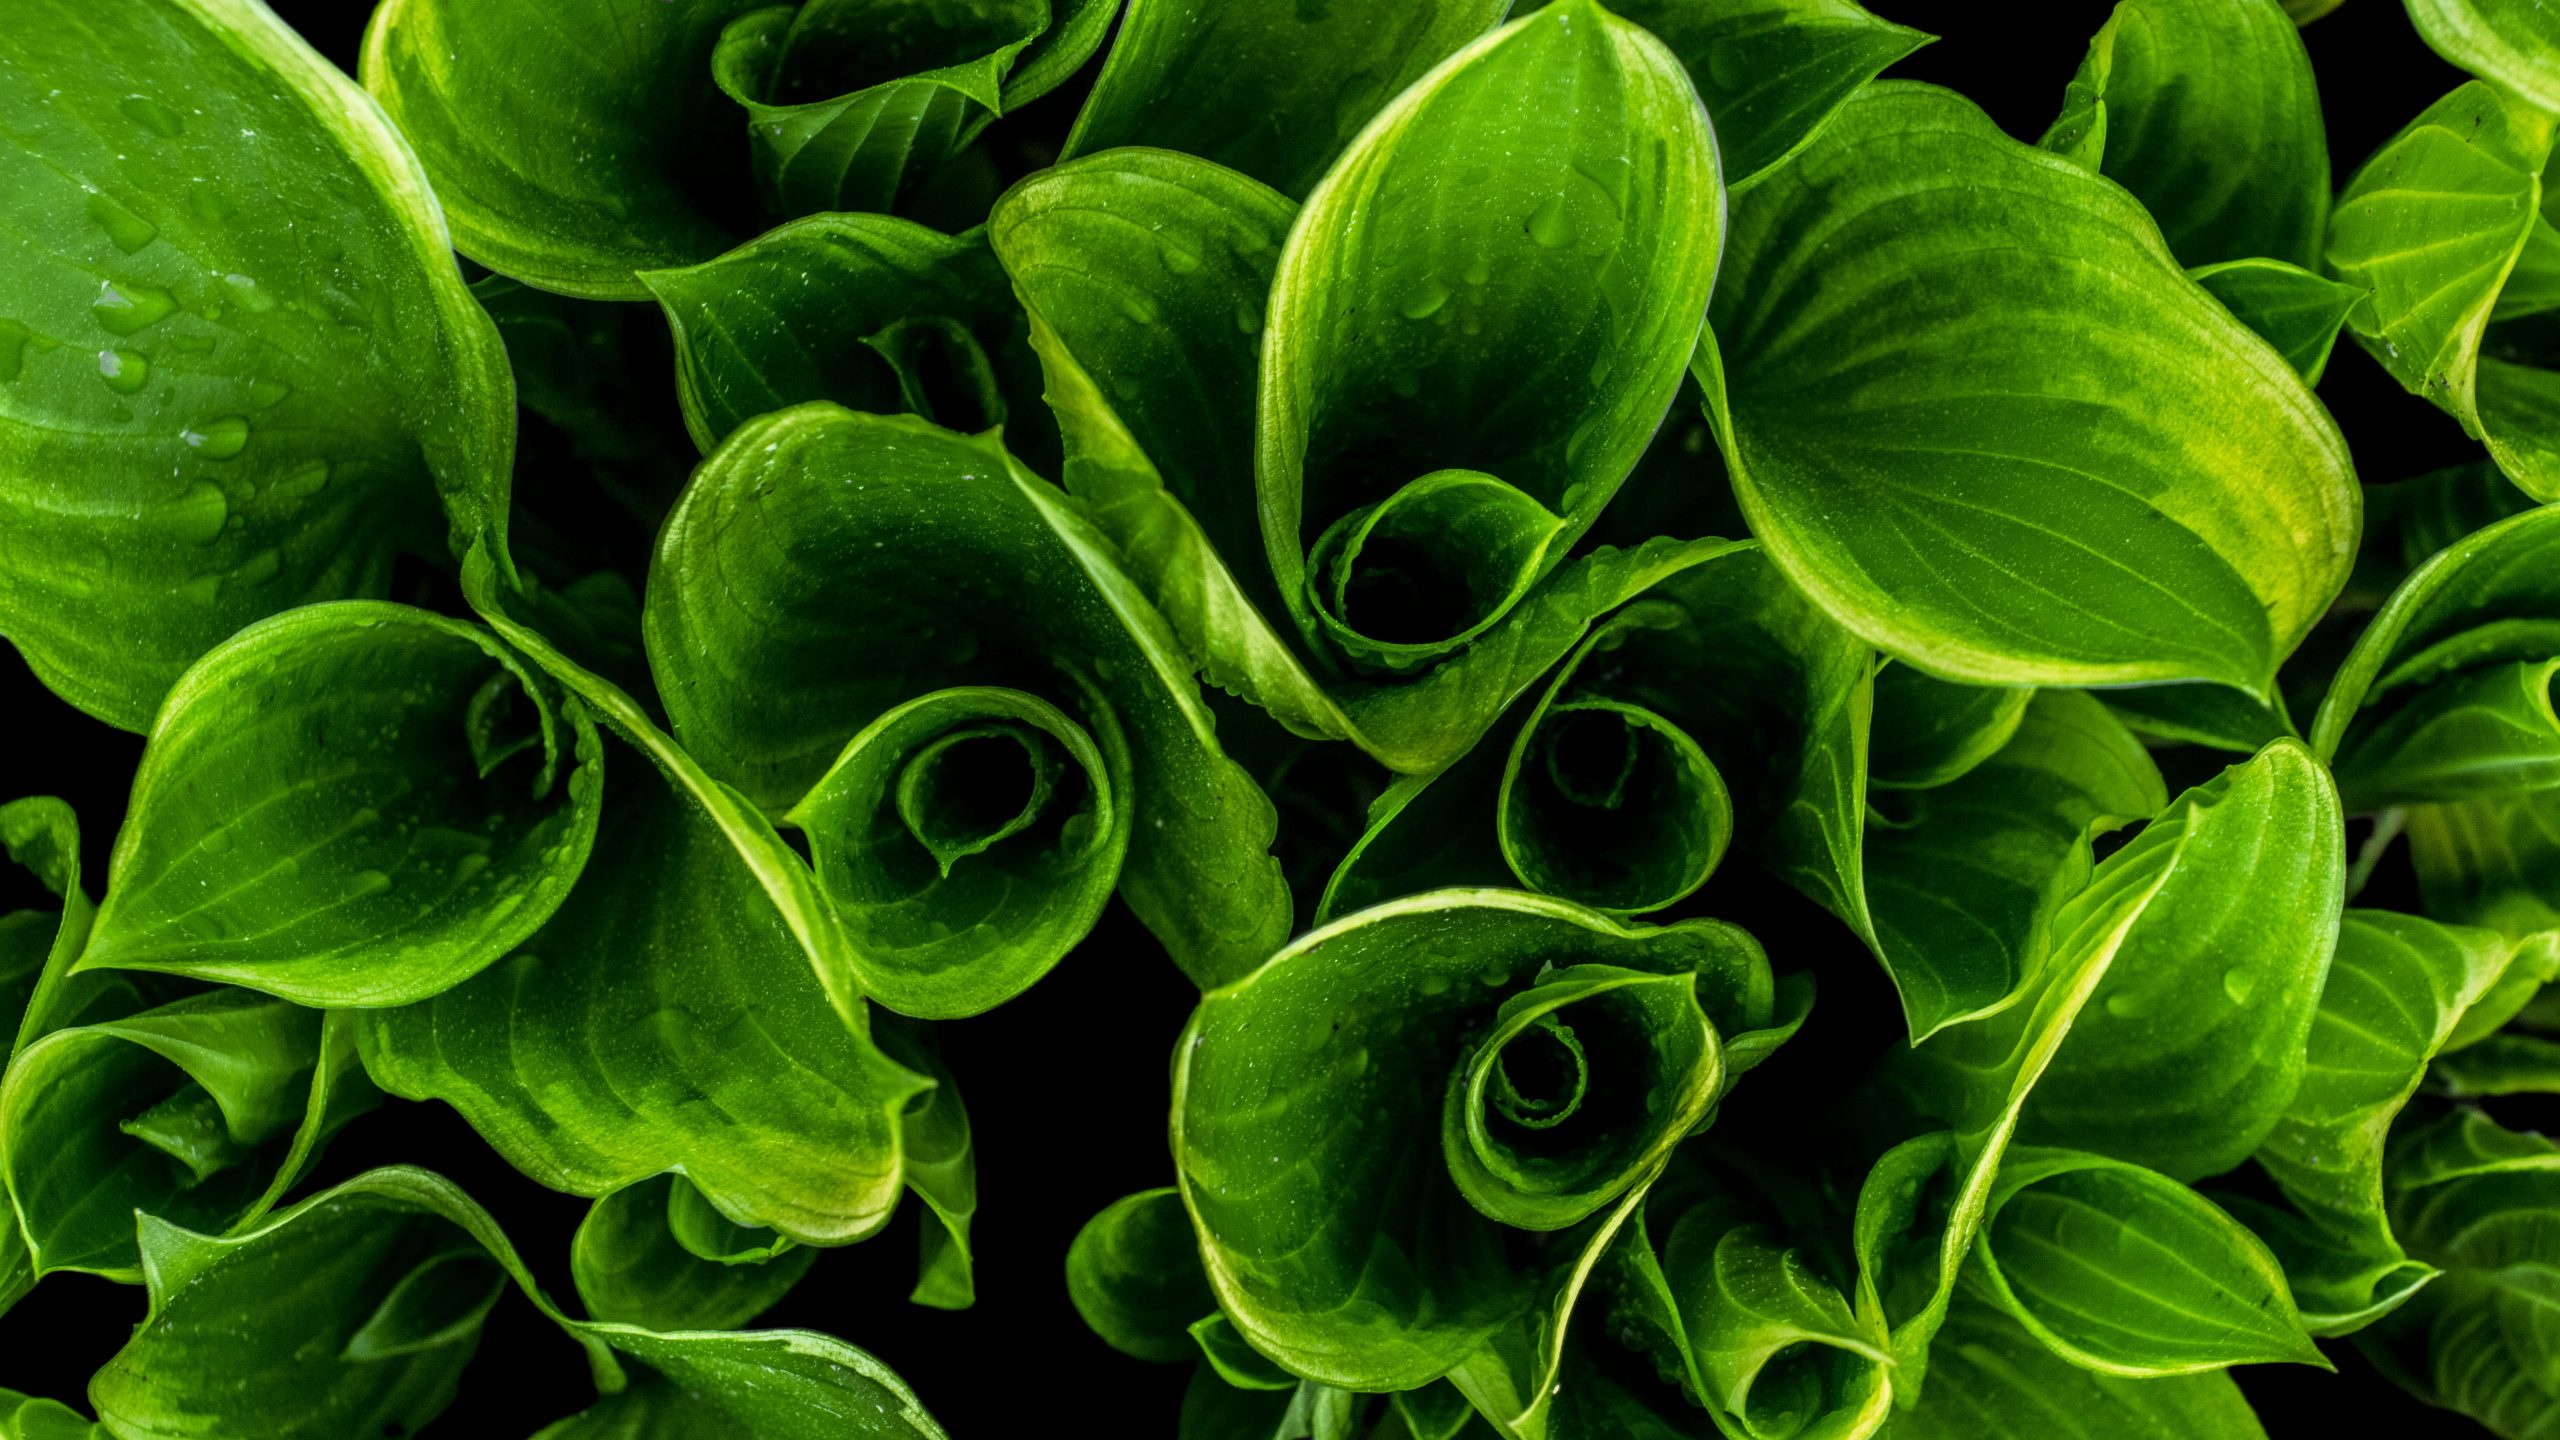 Closeup photo of green-leafed plants